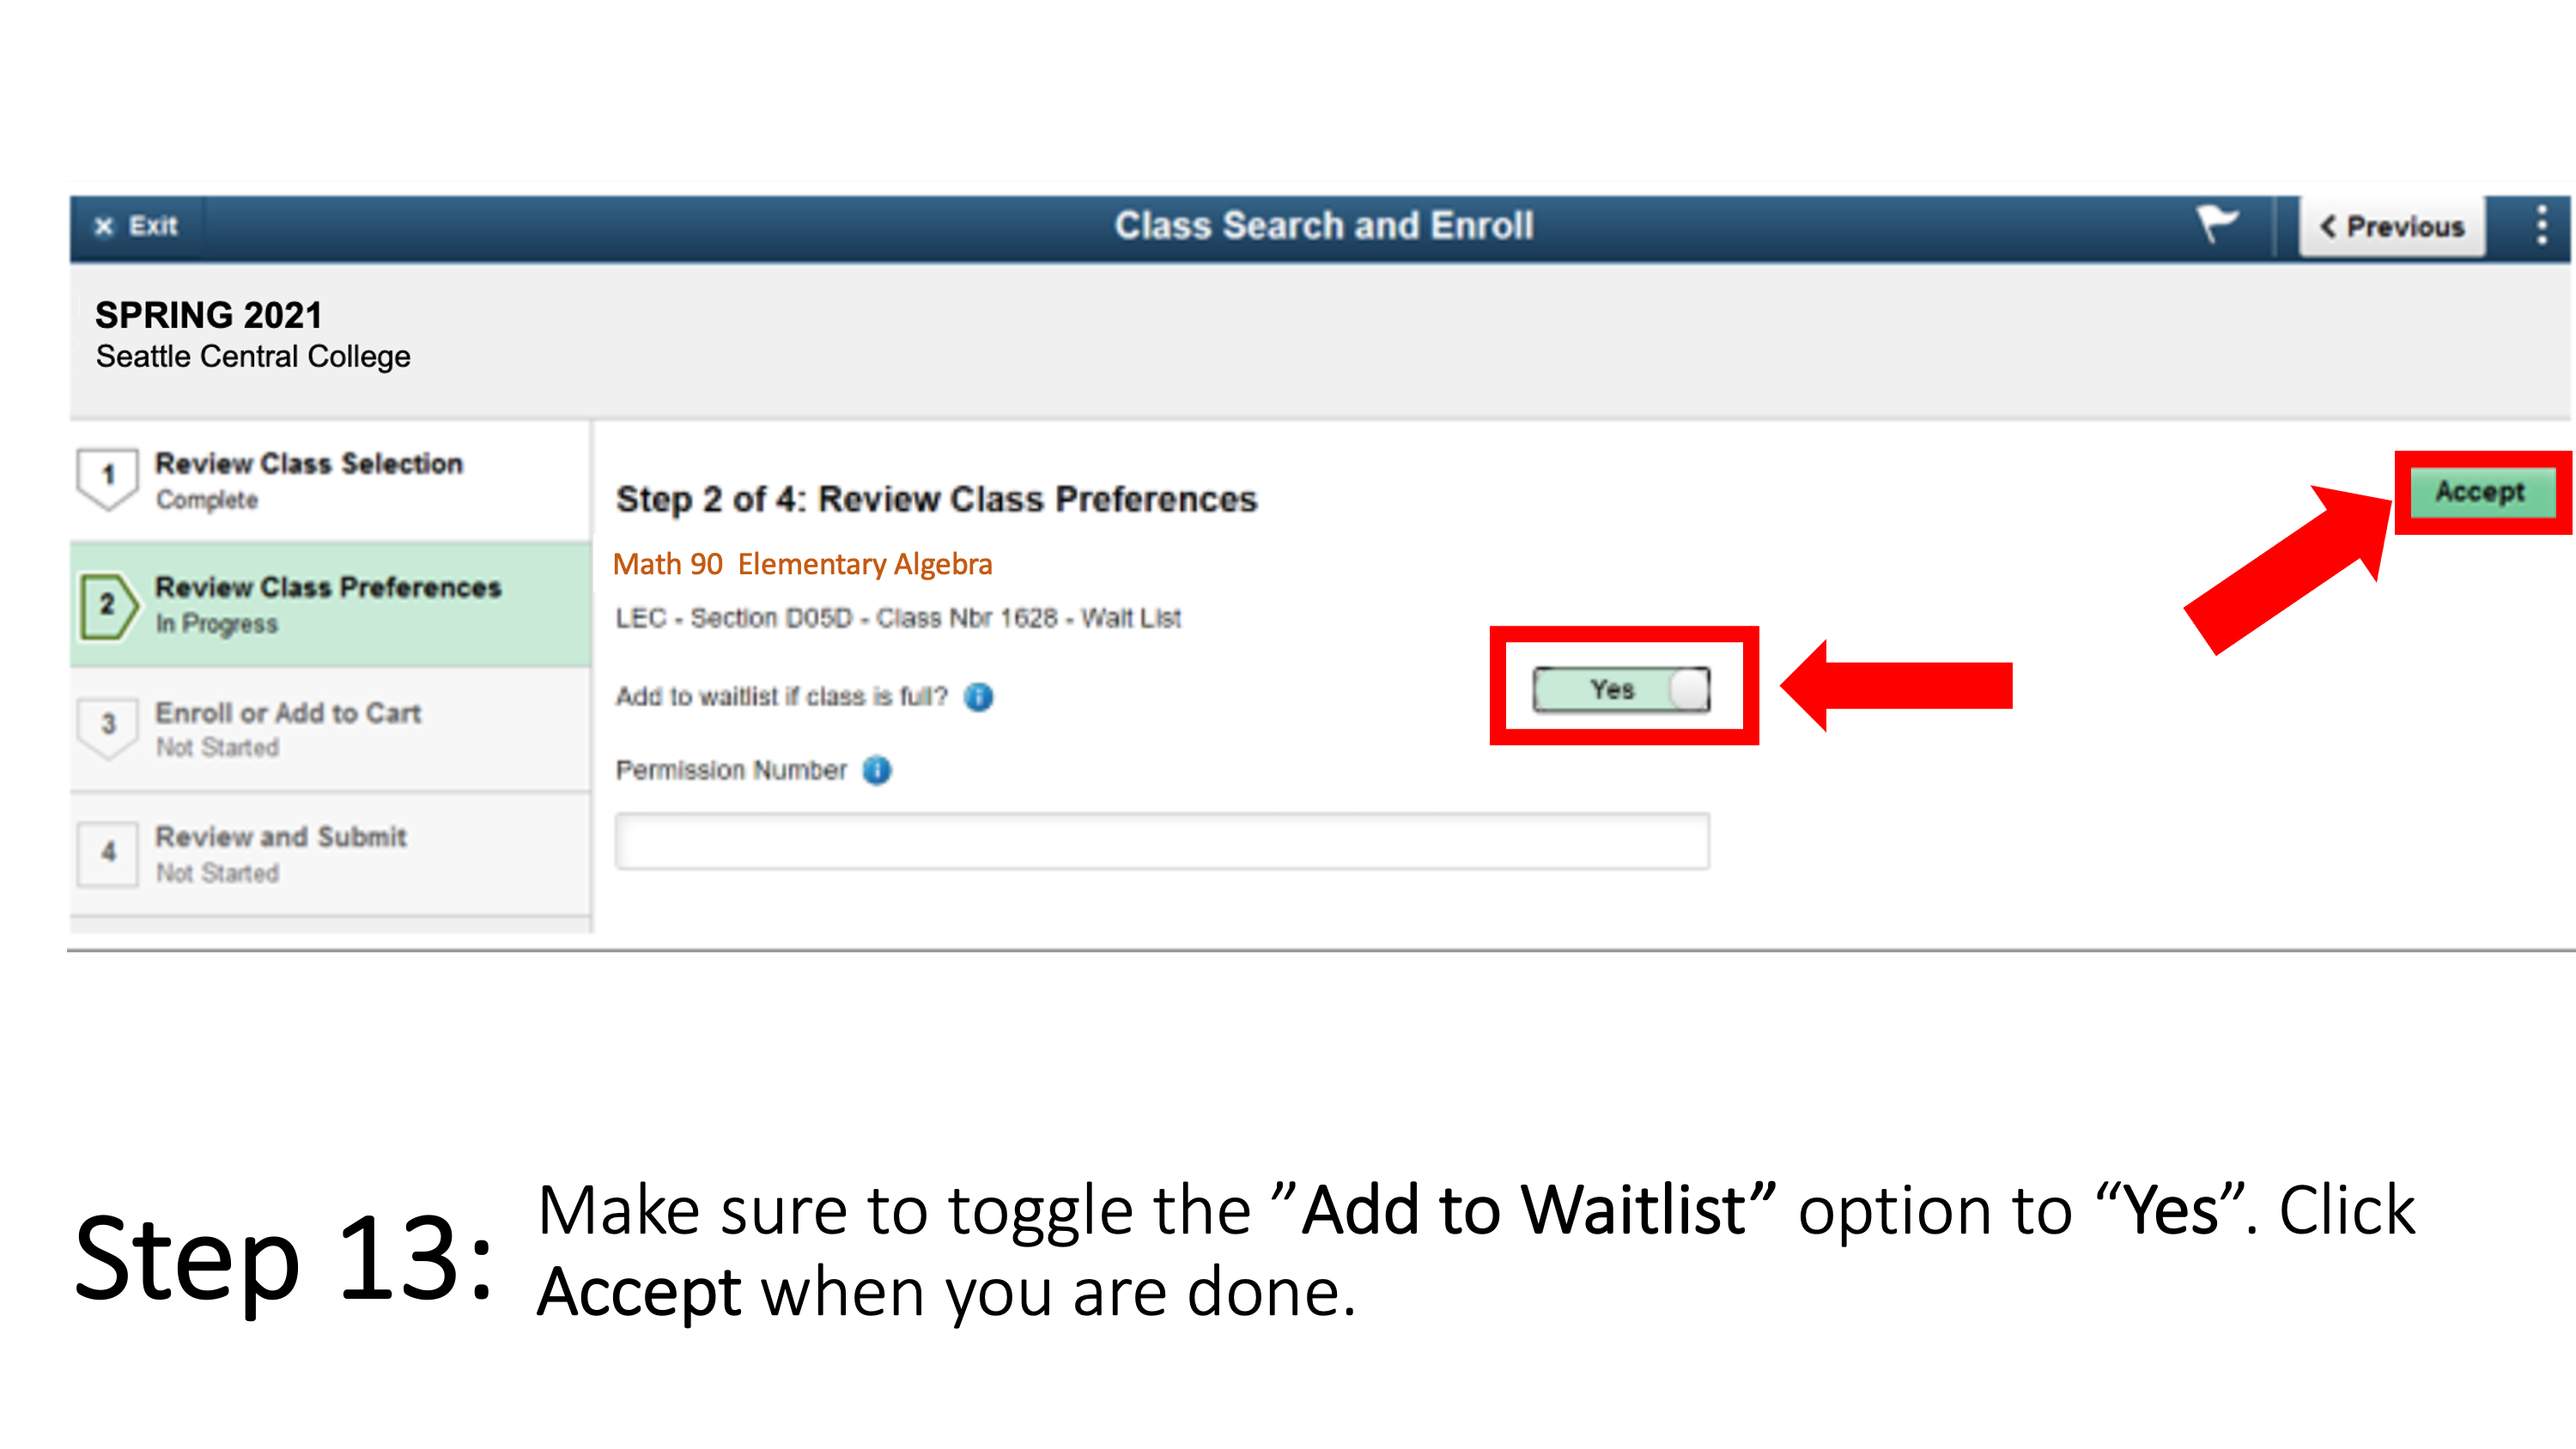 Make sure to toggle the ”Add to Waitlist” option to “Yes”. Click Accept when you are done.